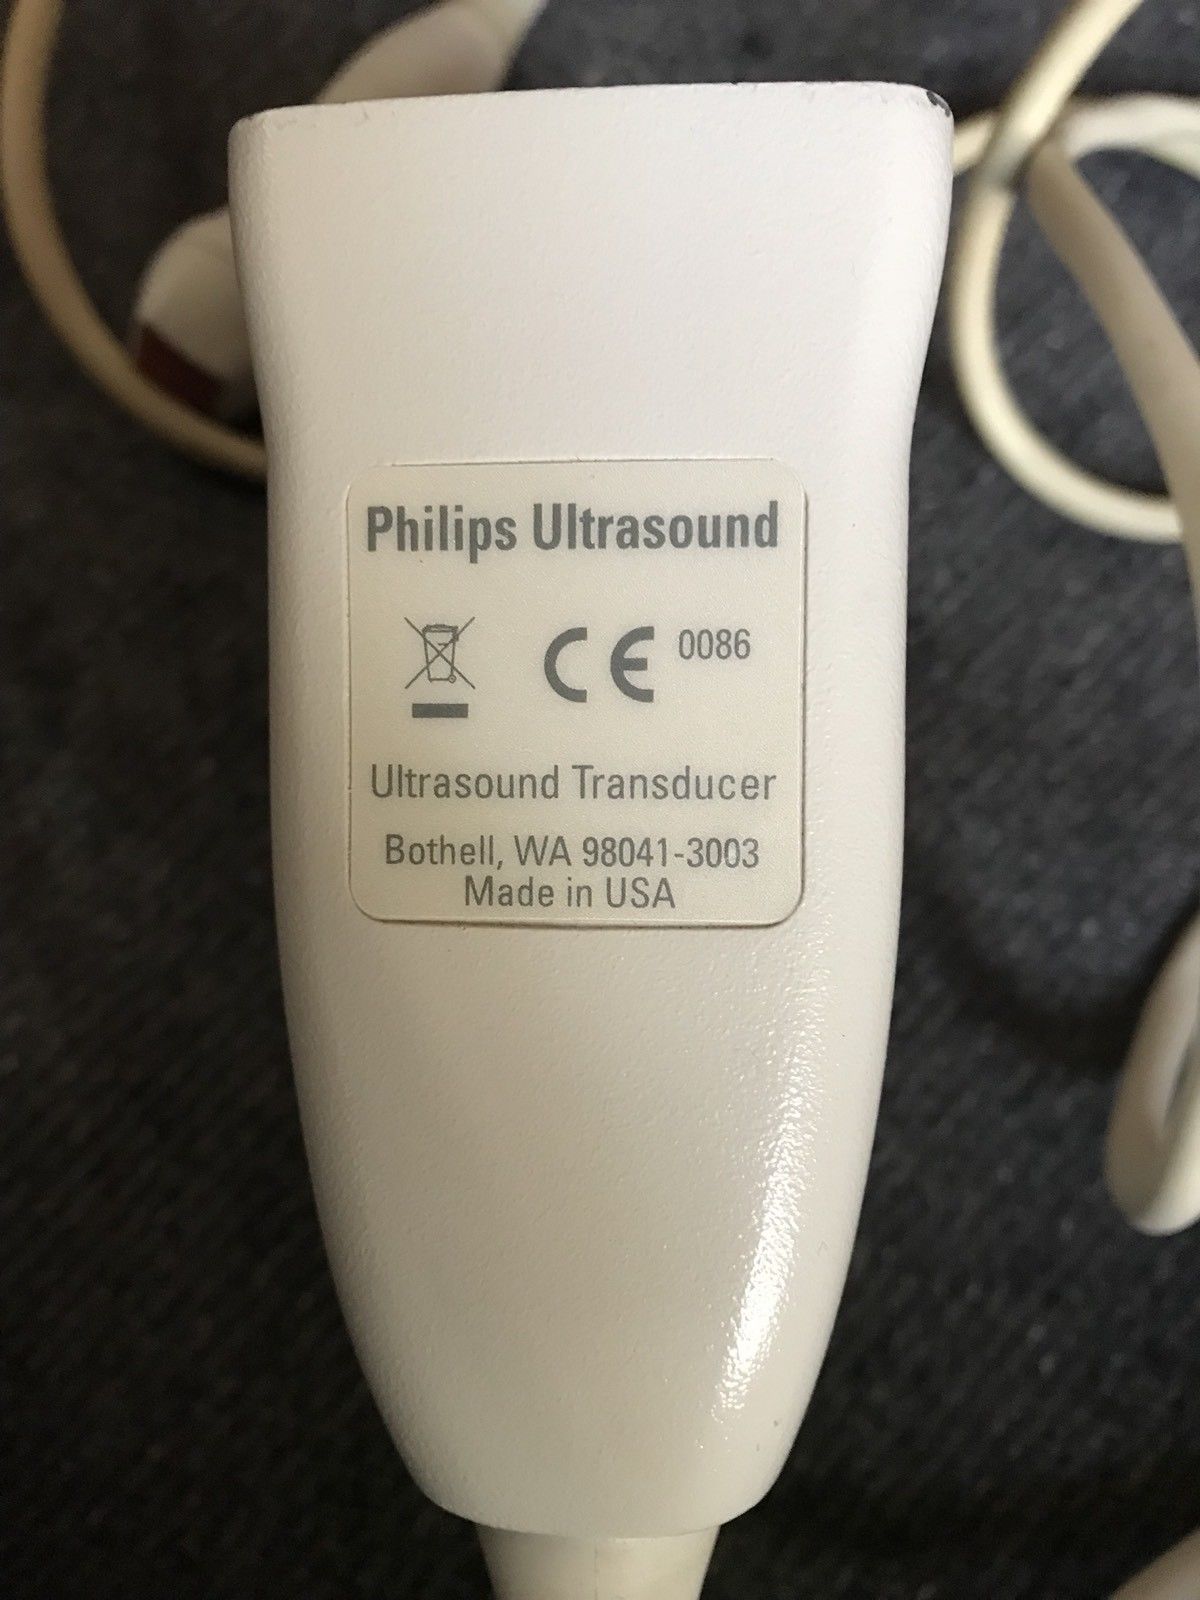 Philips S5-1 Ultrasound Transducer Probe for iE33, iU22 Systems